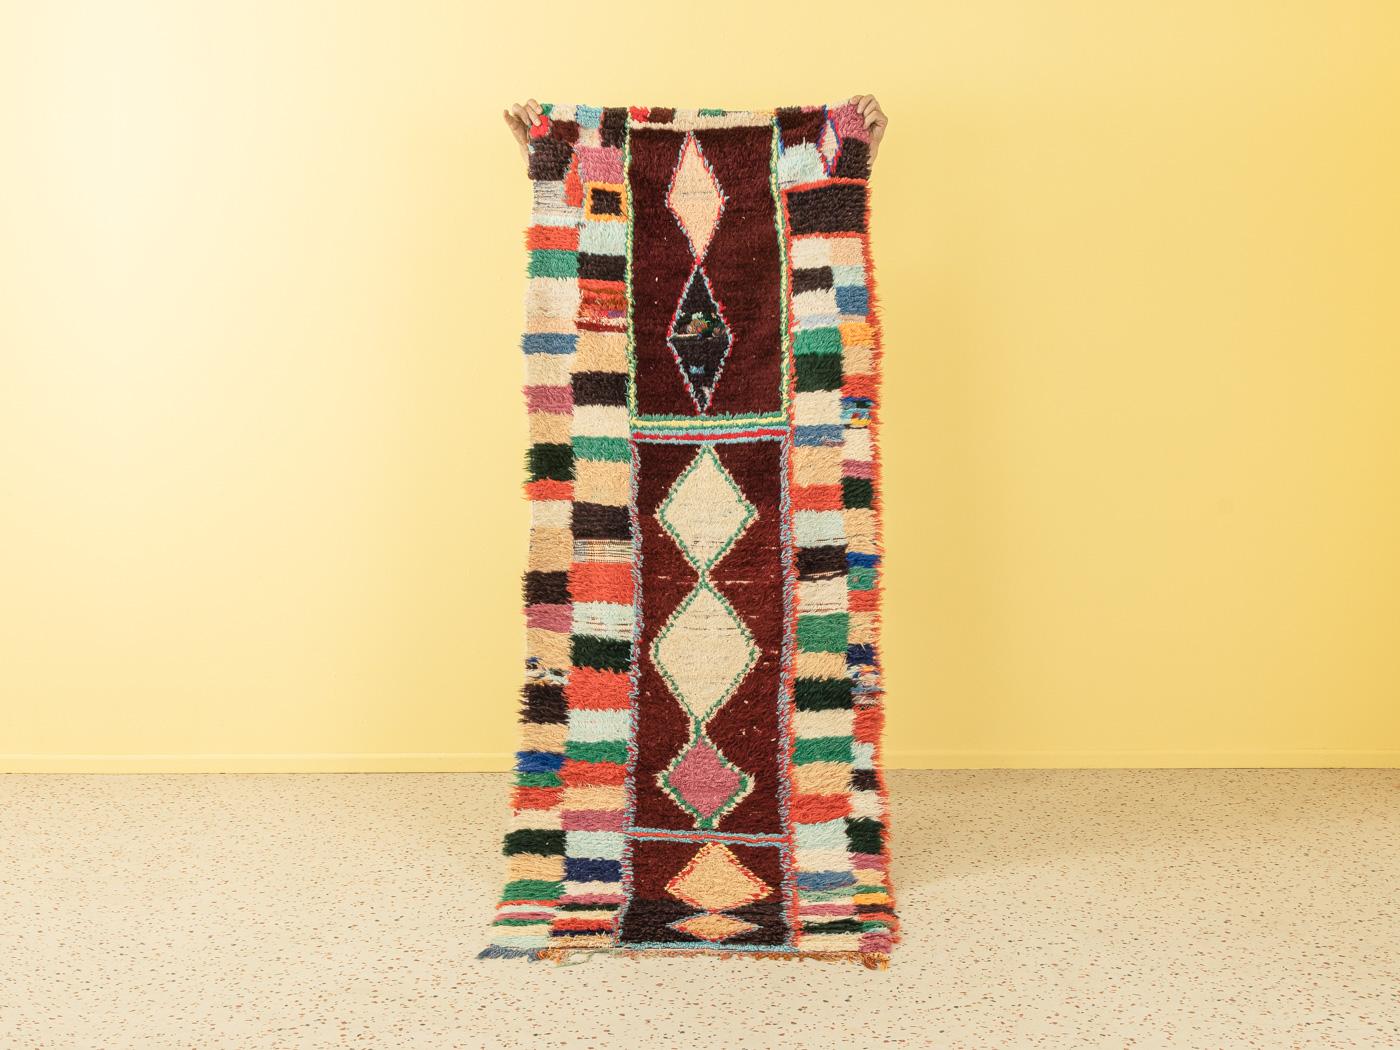 This Boucherouite is an upcycled vintage Berber rug that includes old fabrics and clothes – thick and soft, comfortable underfoot. Our Berber rugs are handmade, one knot at a time. Each of our Berber rugs is a long-lasting one-of-a-kind piece,